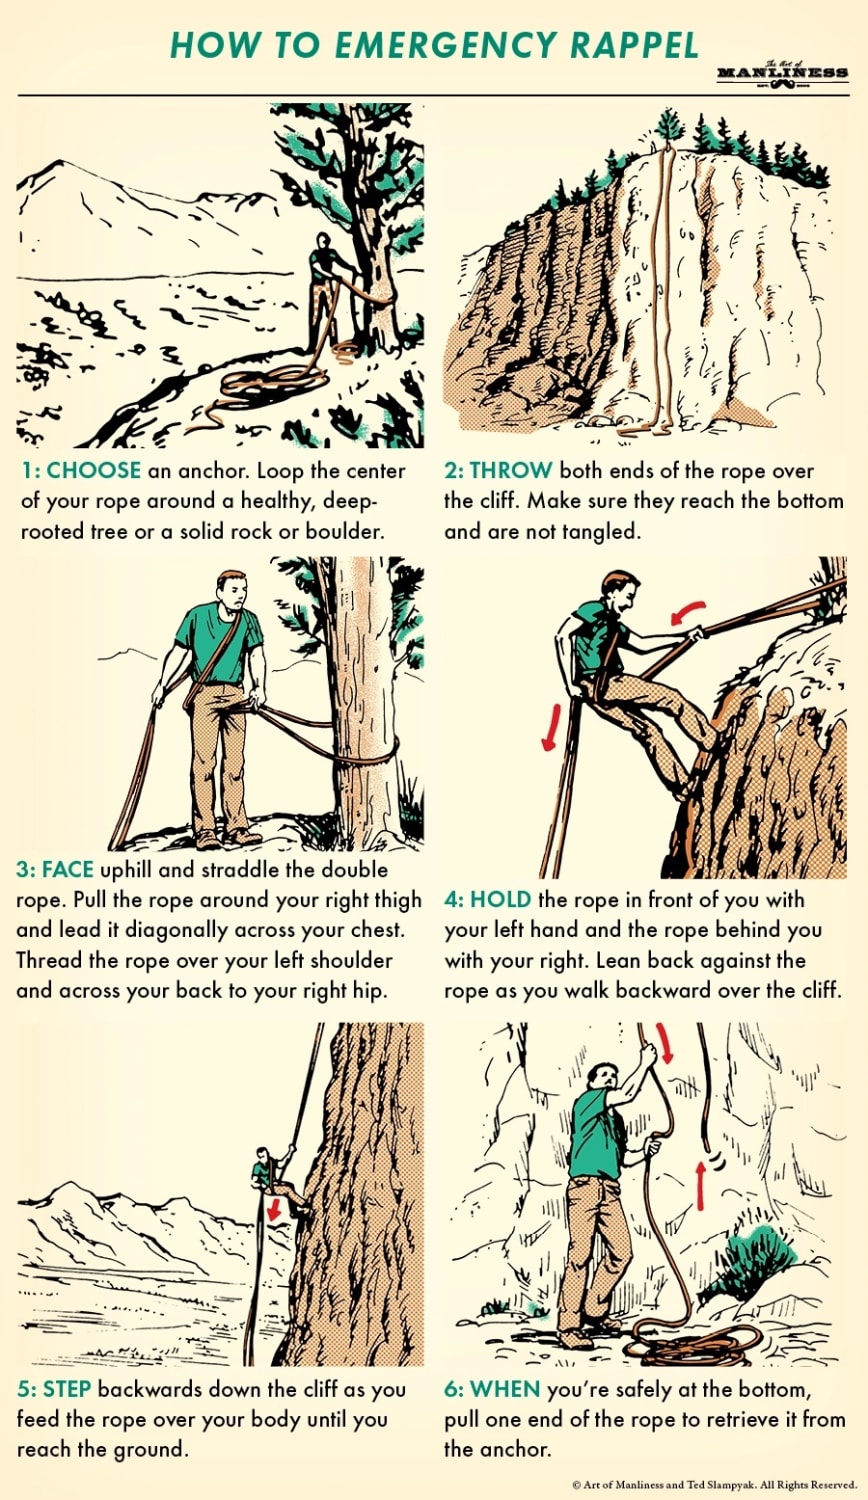 How to Emergency Rappel